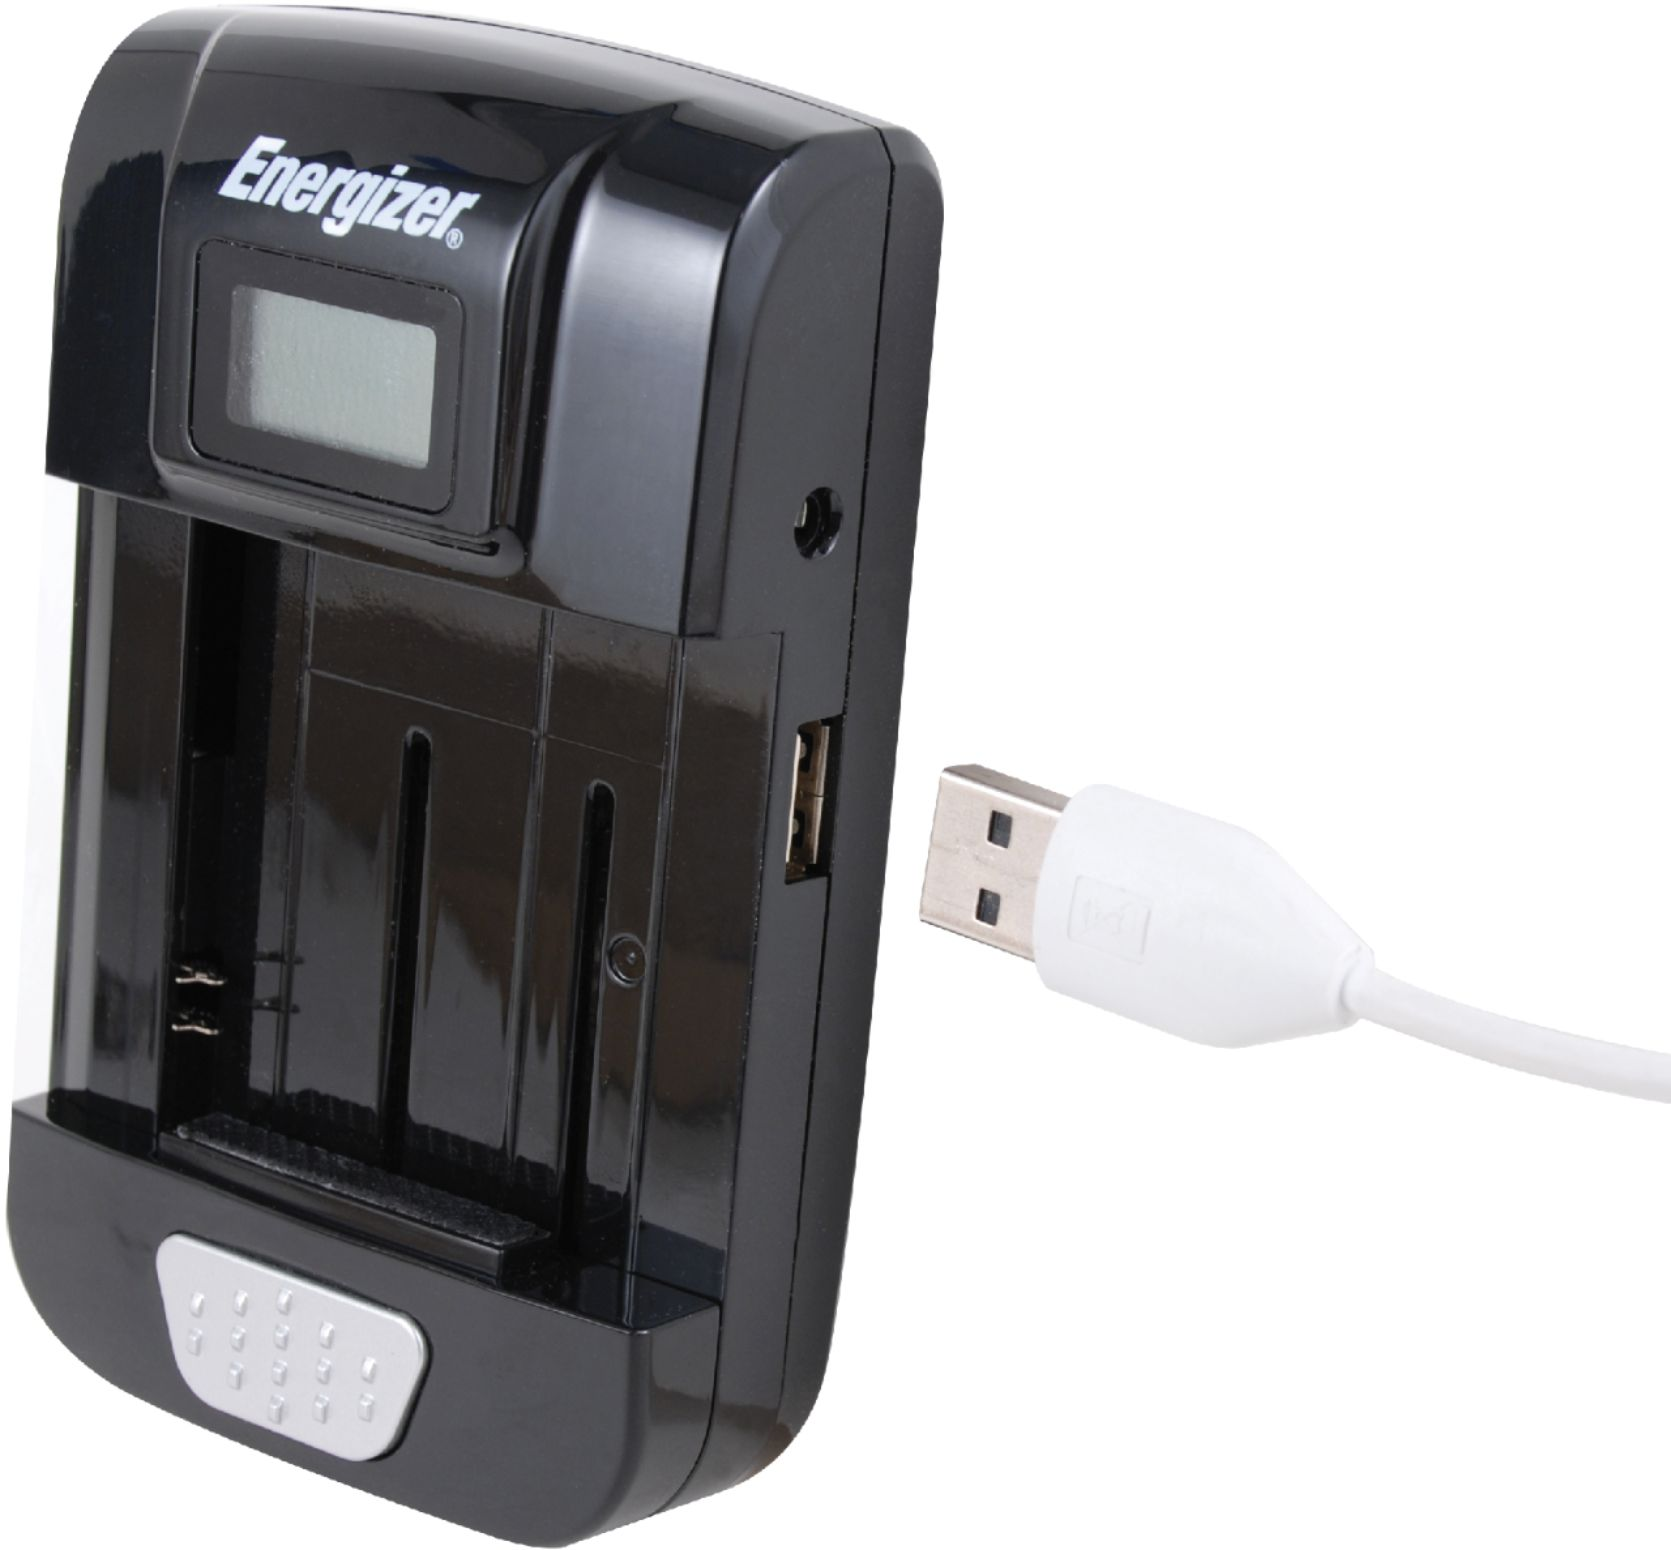 Bower Energizer Universal Charger